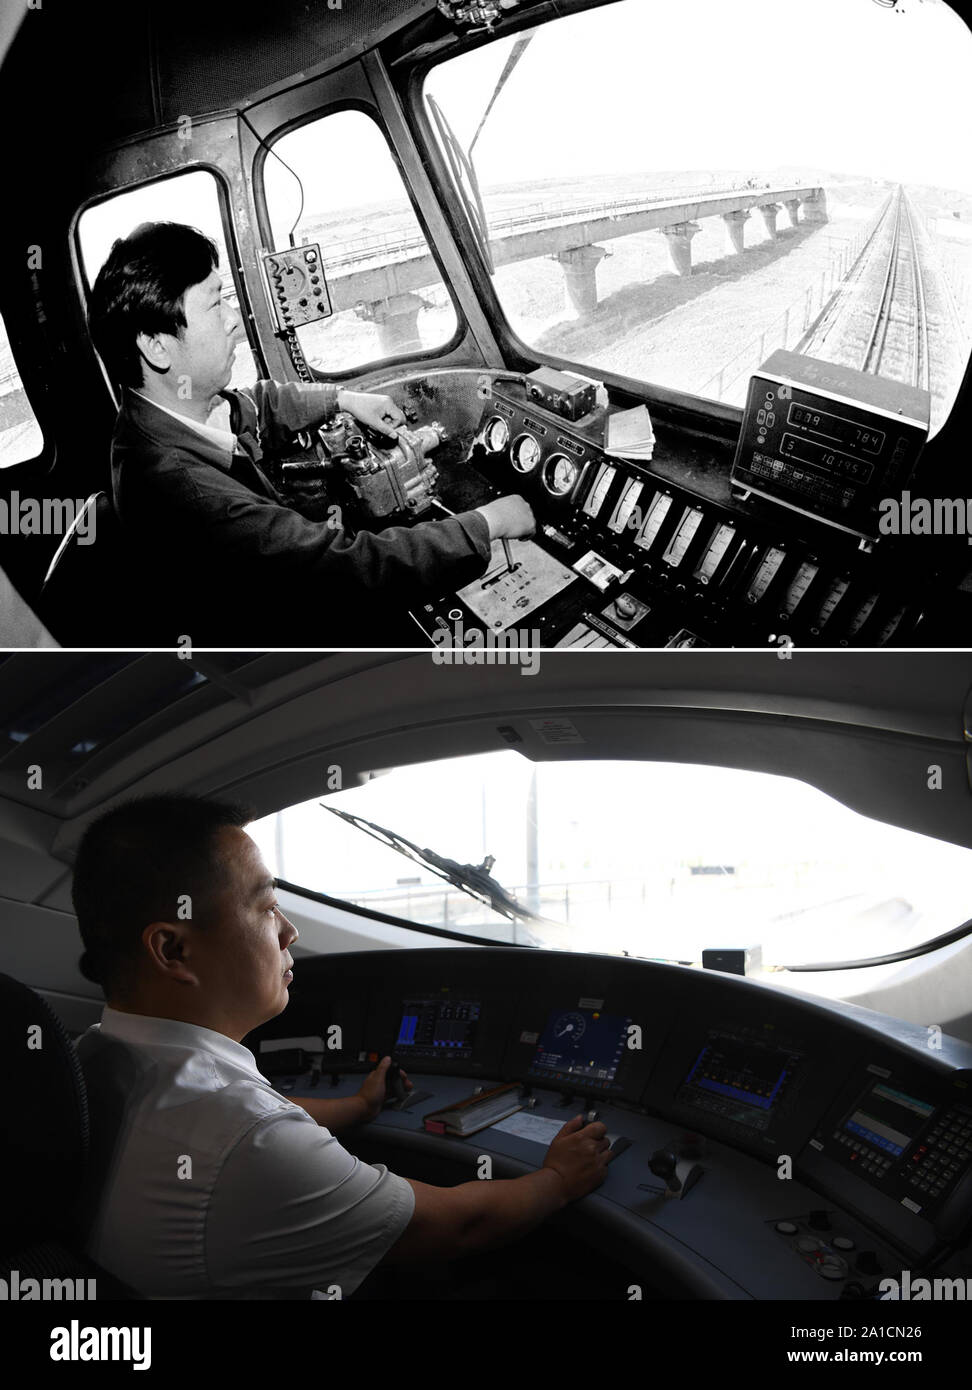 (190926) -- BEIJING, Sept. 26, 2019 (Xinhua) -- Top: File photo taken in 1996 by Wu Chunzhan shows Mi Fugang driving a train on Lanzhou-Xinjiang Railway.Bottom: Photo taken on June 28, 2019 by Zhang Rui shows Niu Ben driving CRH380B high-speed train away from Lanzhou West Railway Station in Lanzhou, northwest China's Gansu Province. In the past, train drivers had to call the station to confirm the inbound track and signals, and watch out for signal light on their own. Nowadays, these tasks have been replaced by automatic signal acquisition system. The mechanized control in the train cab has be Stock Photo